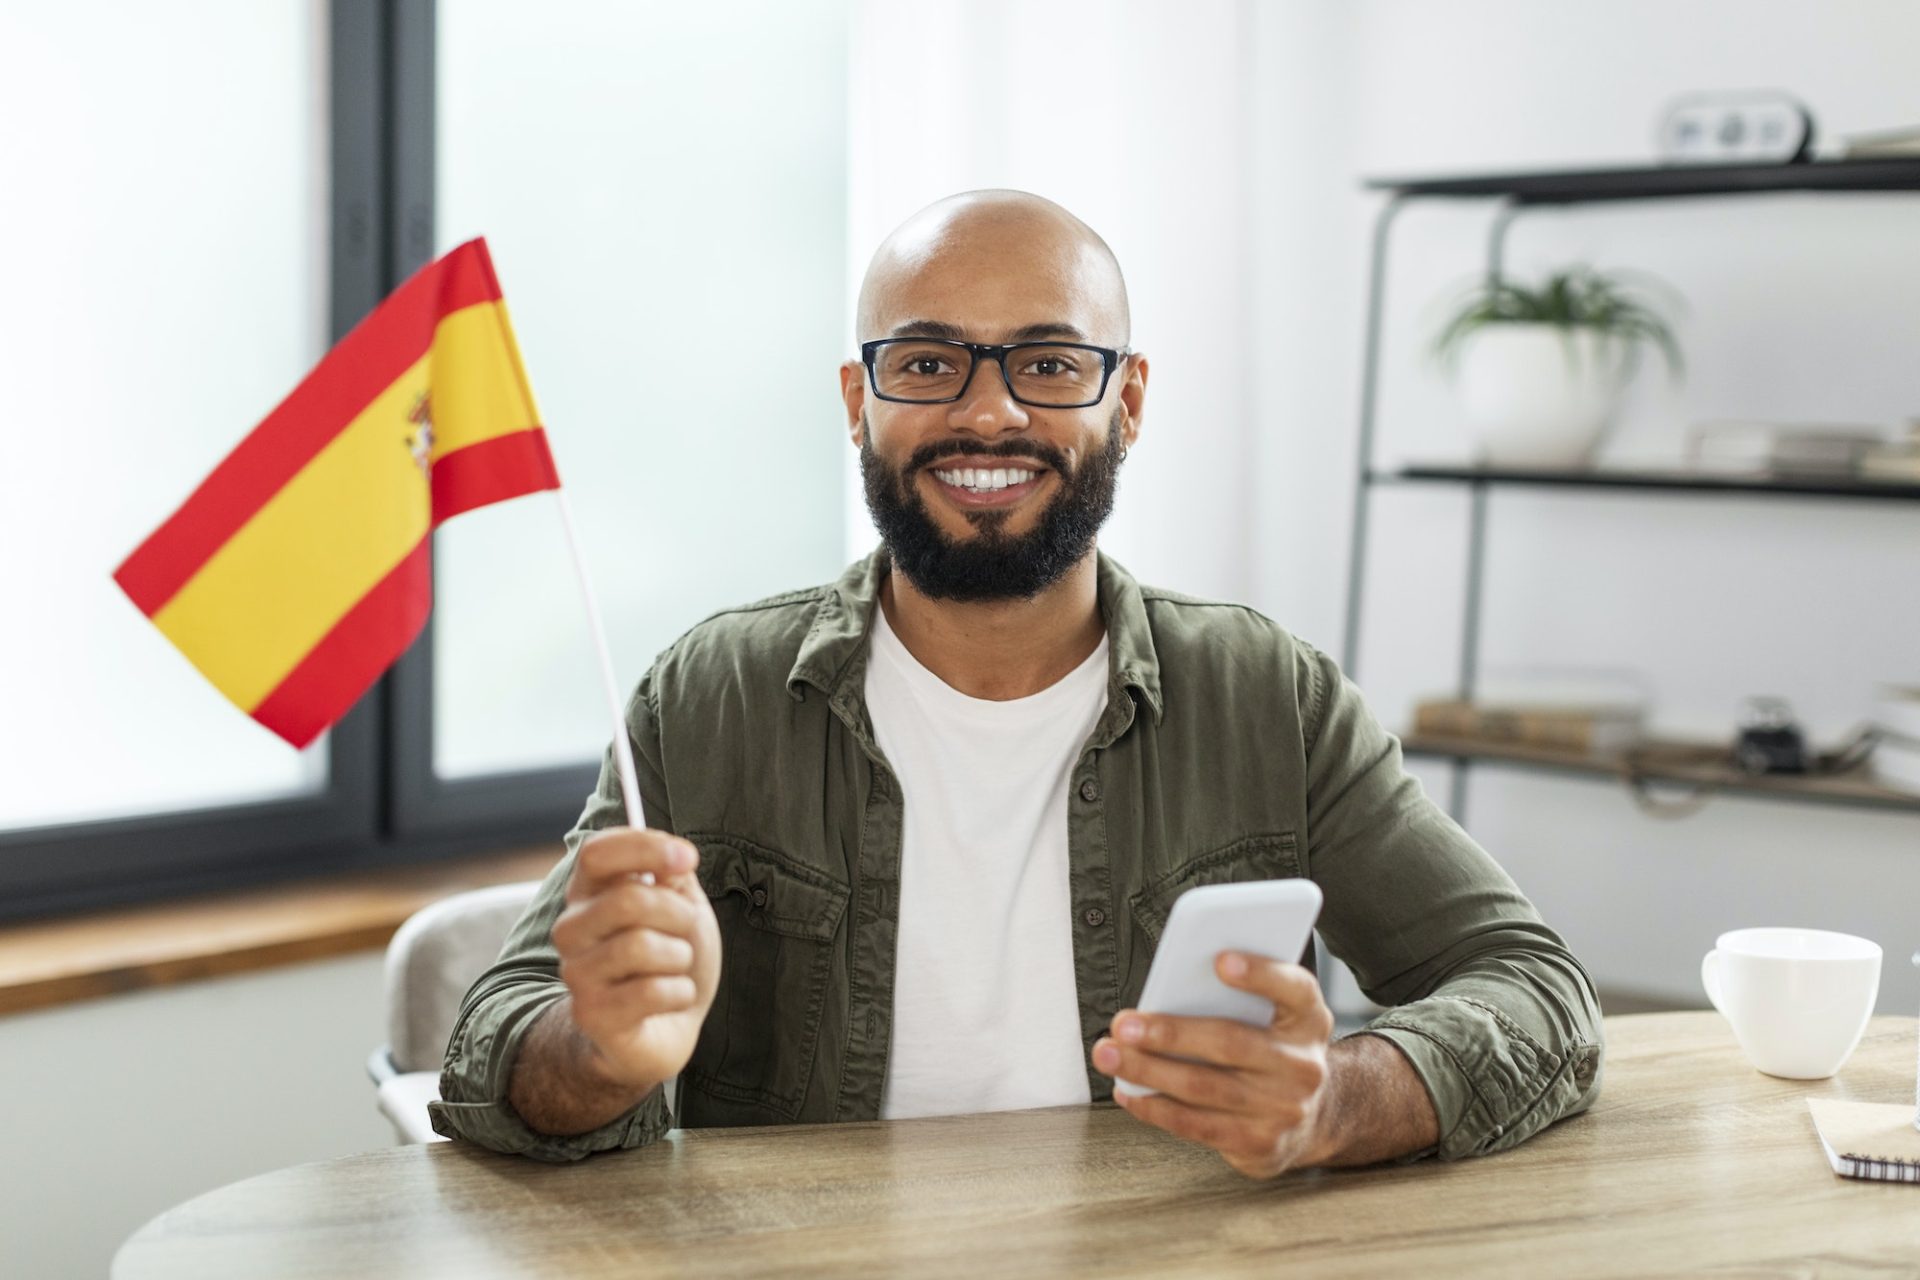 Excited male tutor sitting at table with flag of Spain and using smartphone, looking and smiling at